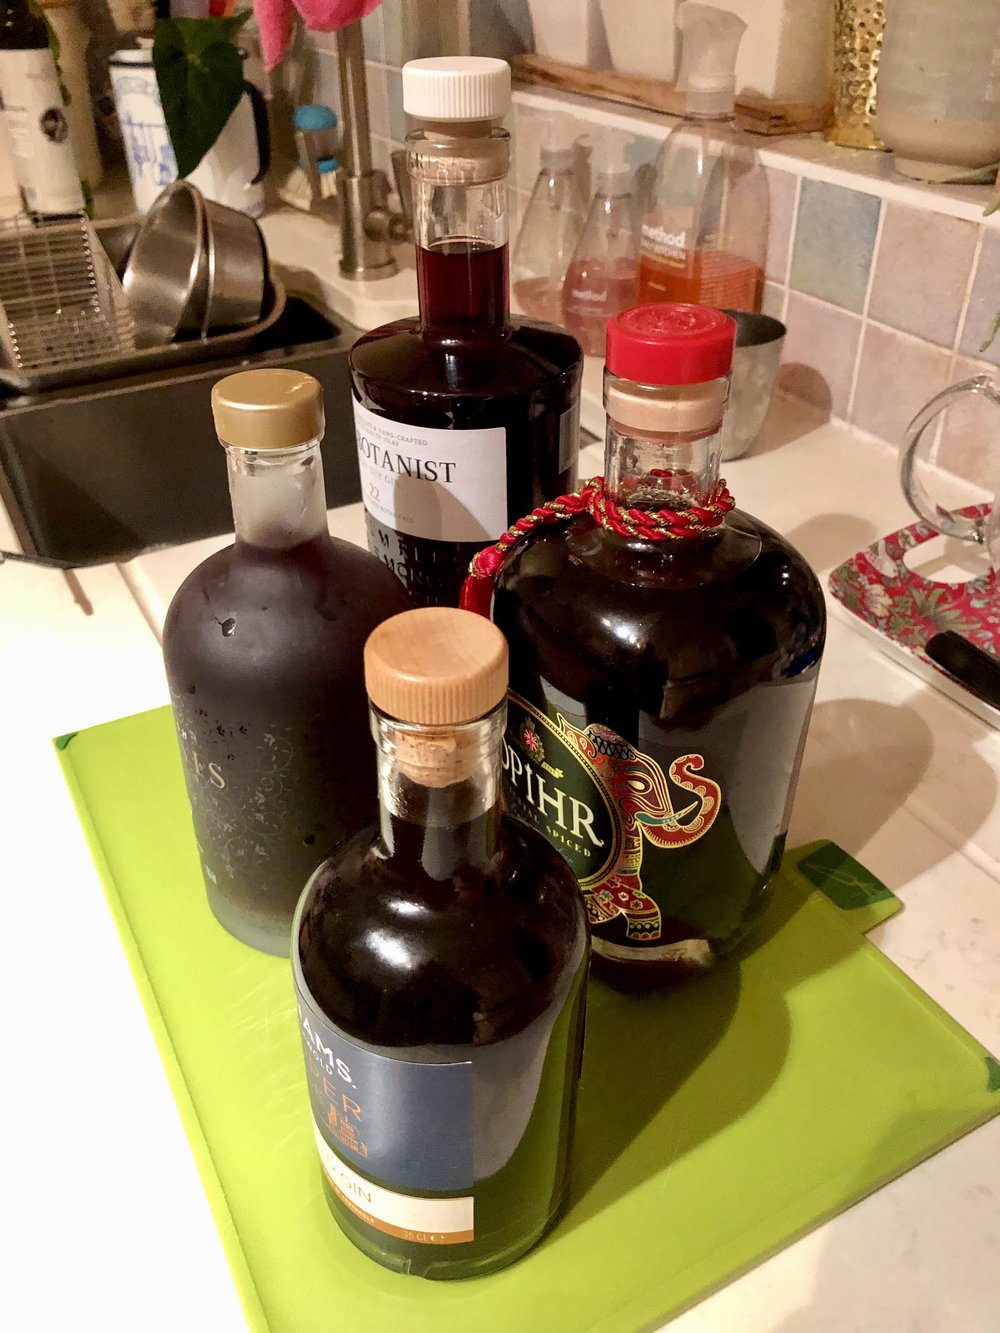 The Blueberry Gin